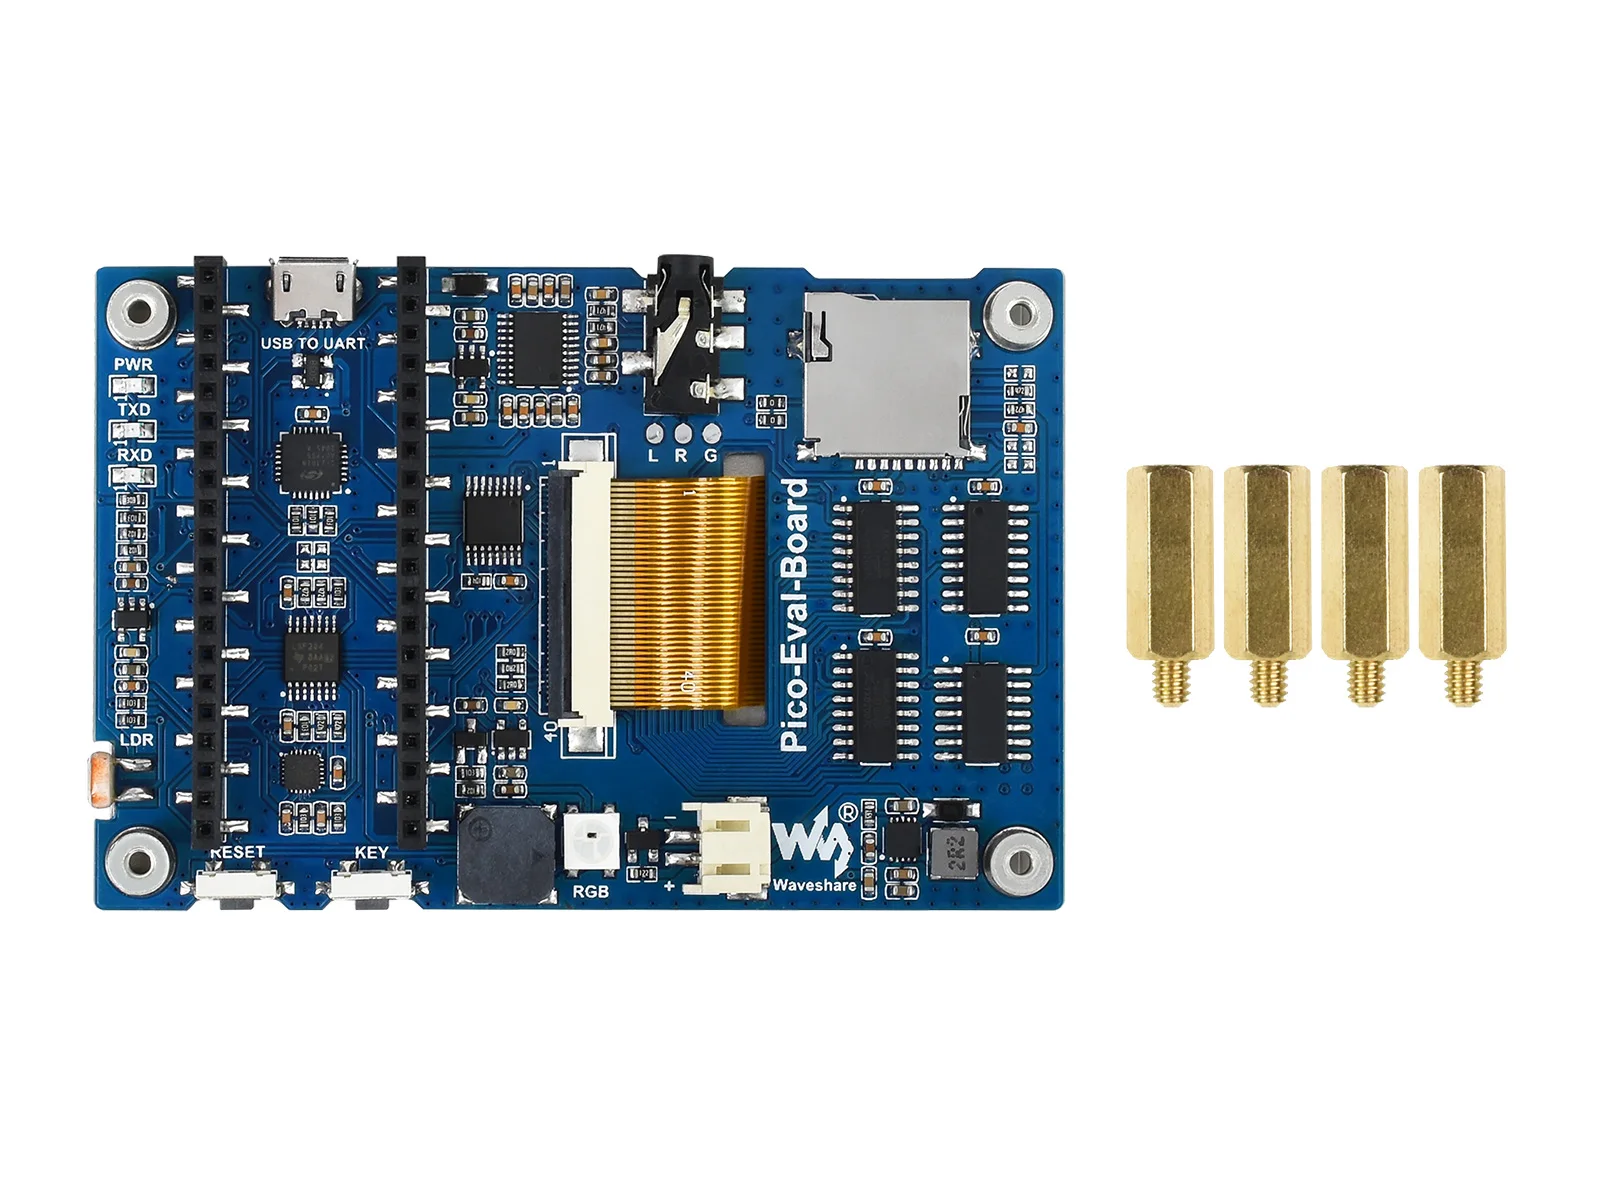 

Waveshare Overall Evaluation Board Designed For Raspberry Pi Pico, Misc Onboard Components For Easily Evaluating The RP2040